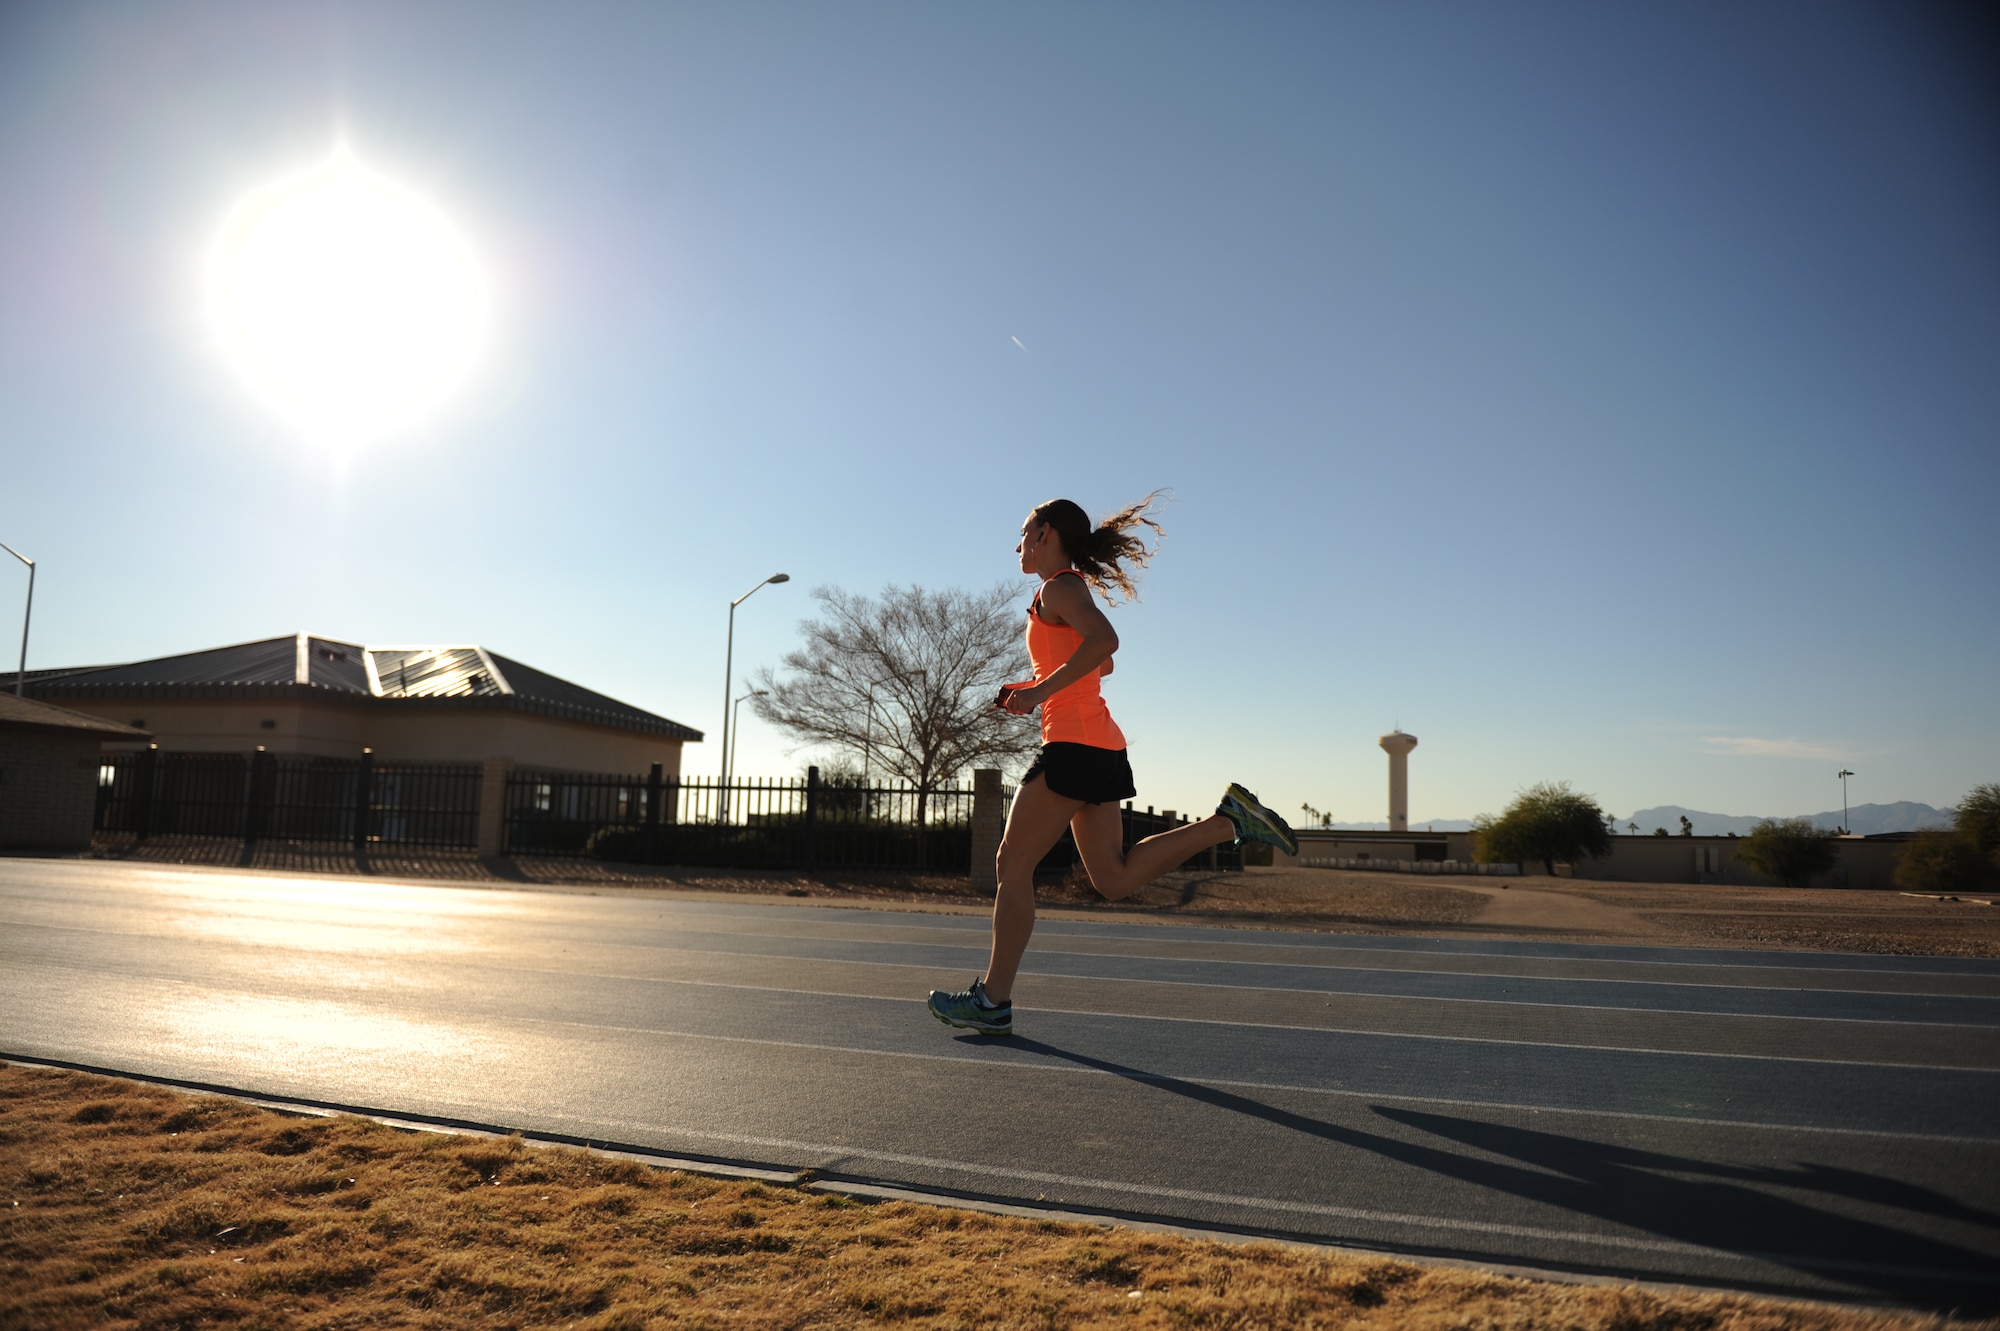 Senior Airman Melissa Franks, 56th Aerospace Medicine Squadron flight medicine medical technician, runs on the track at Luke Air Force Base, Ariz. Franks can run 1.5 miles in 9:15 and has placed first in all the 5-kilometer runs she’s attended at Luke in the female category. (U.S. Air Force photo by Senior Airman Grace Lee)